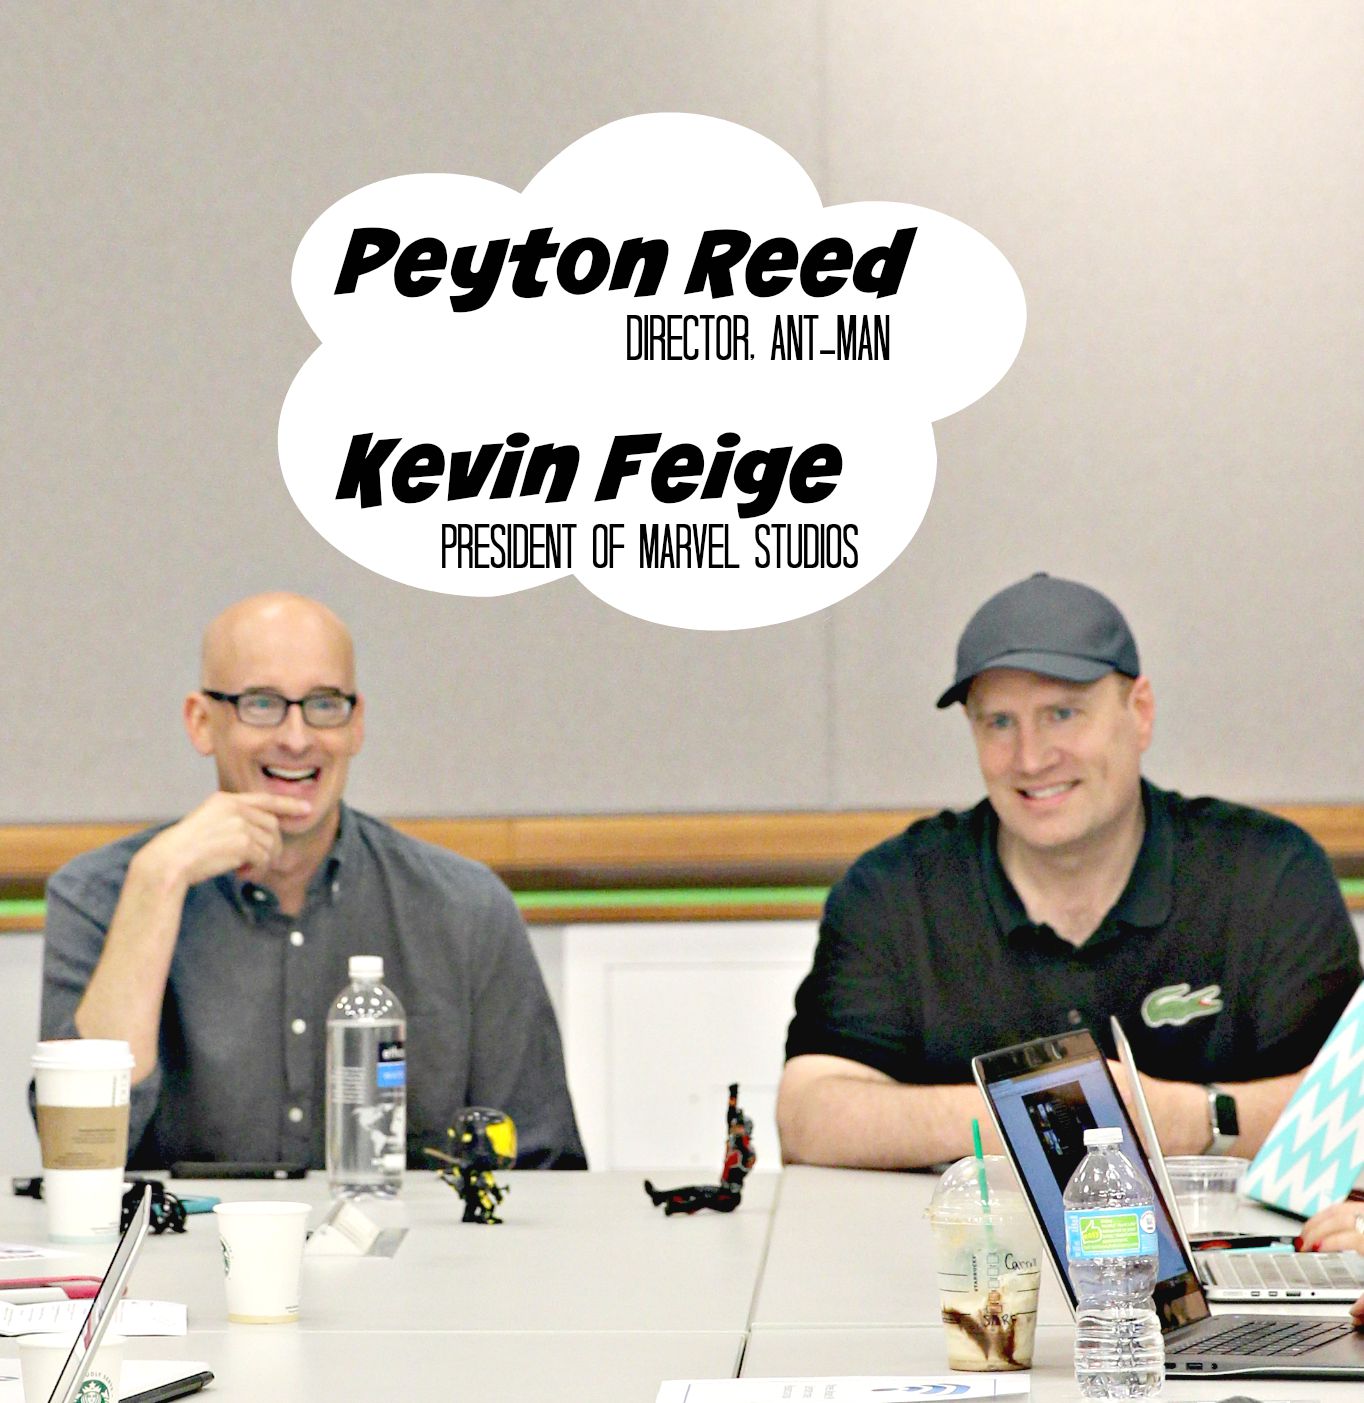 ANT-MAN Director Peyton Reed & Producer and President of Marvel Studios Kevin Feige